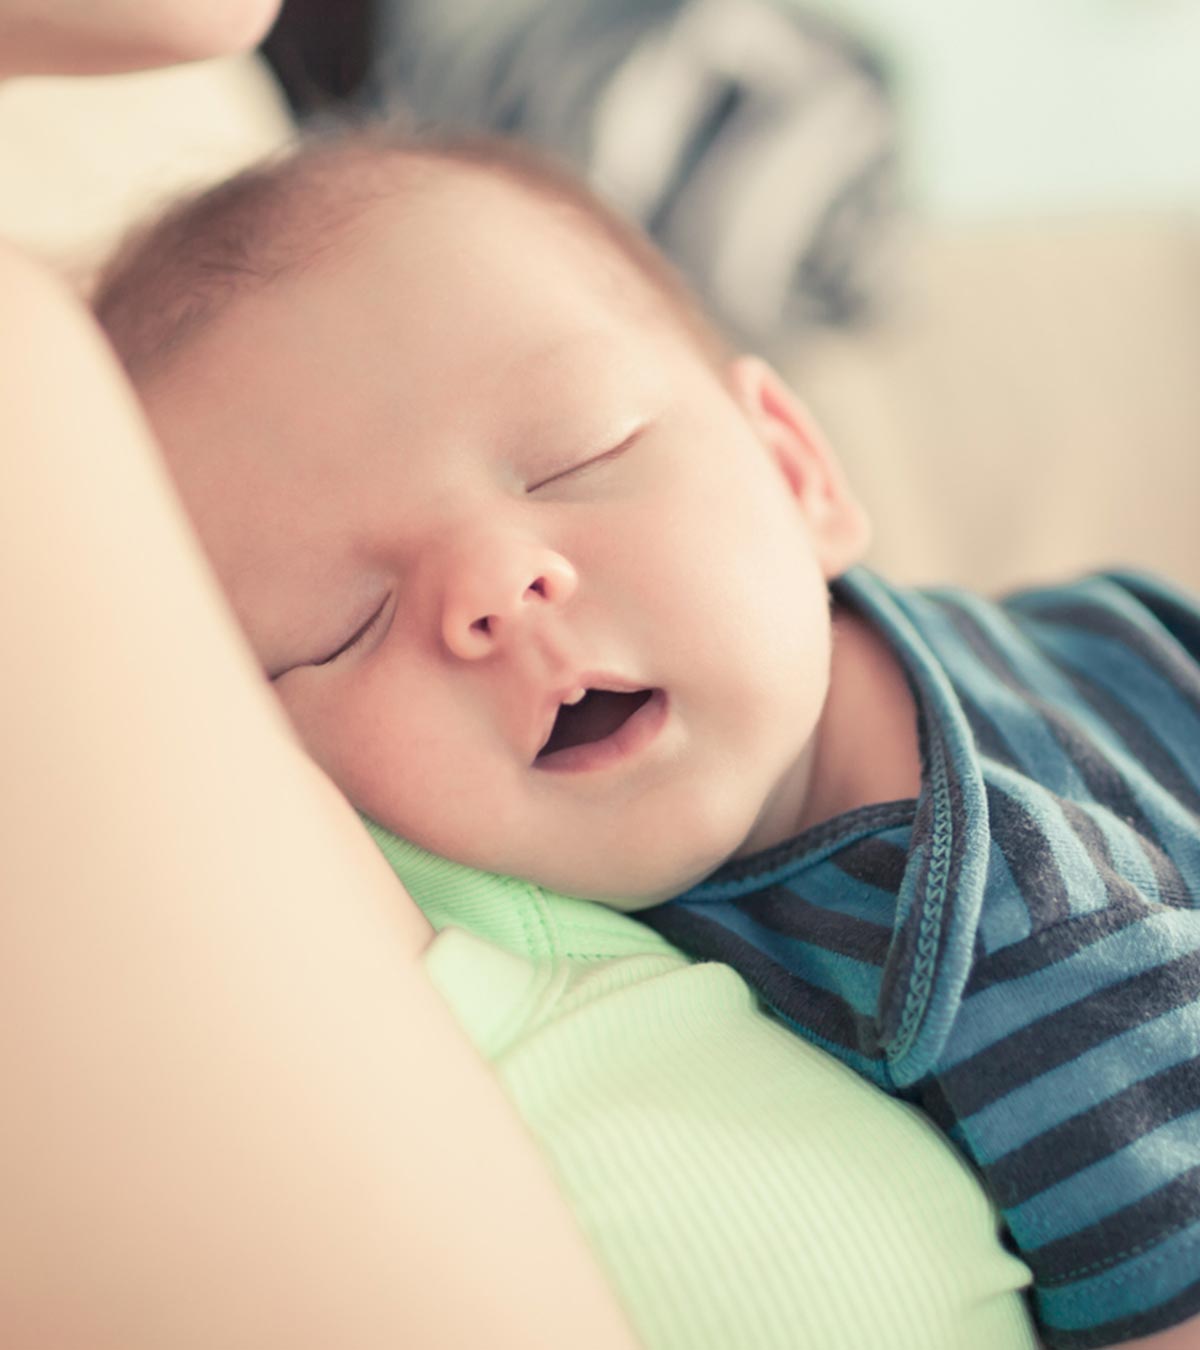 Baby Sleeps With Mouth Open: Causes And When To Worry